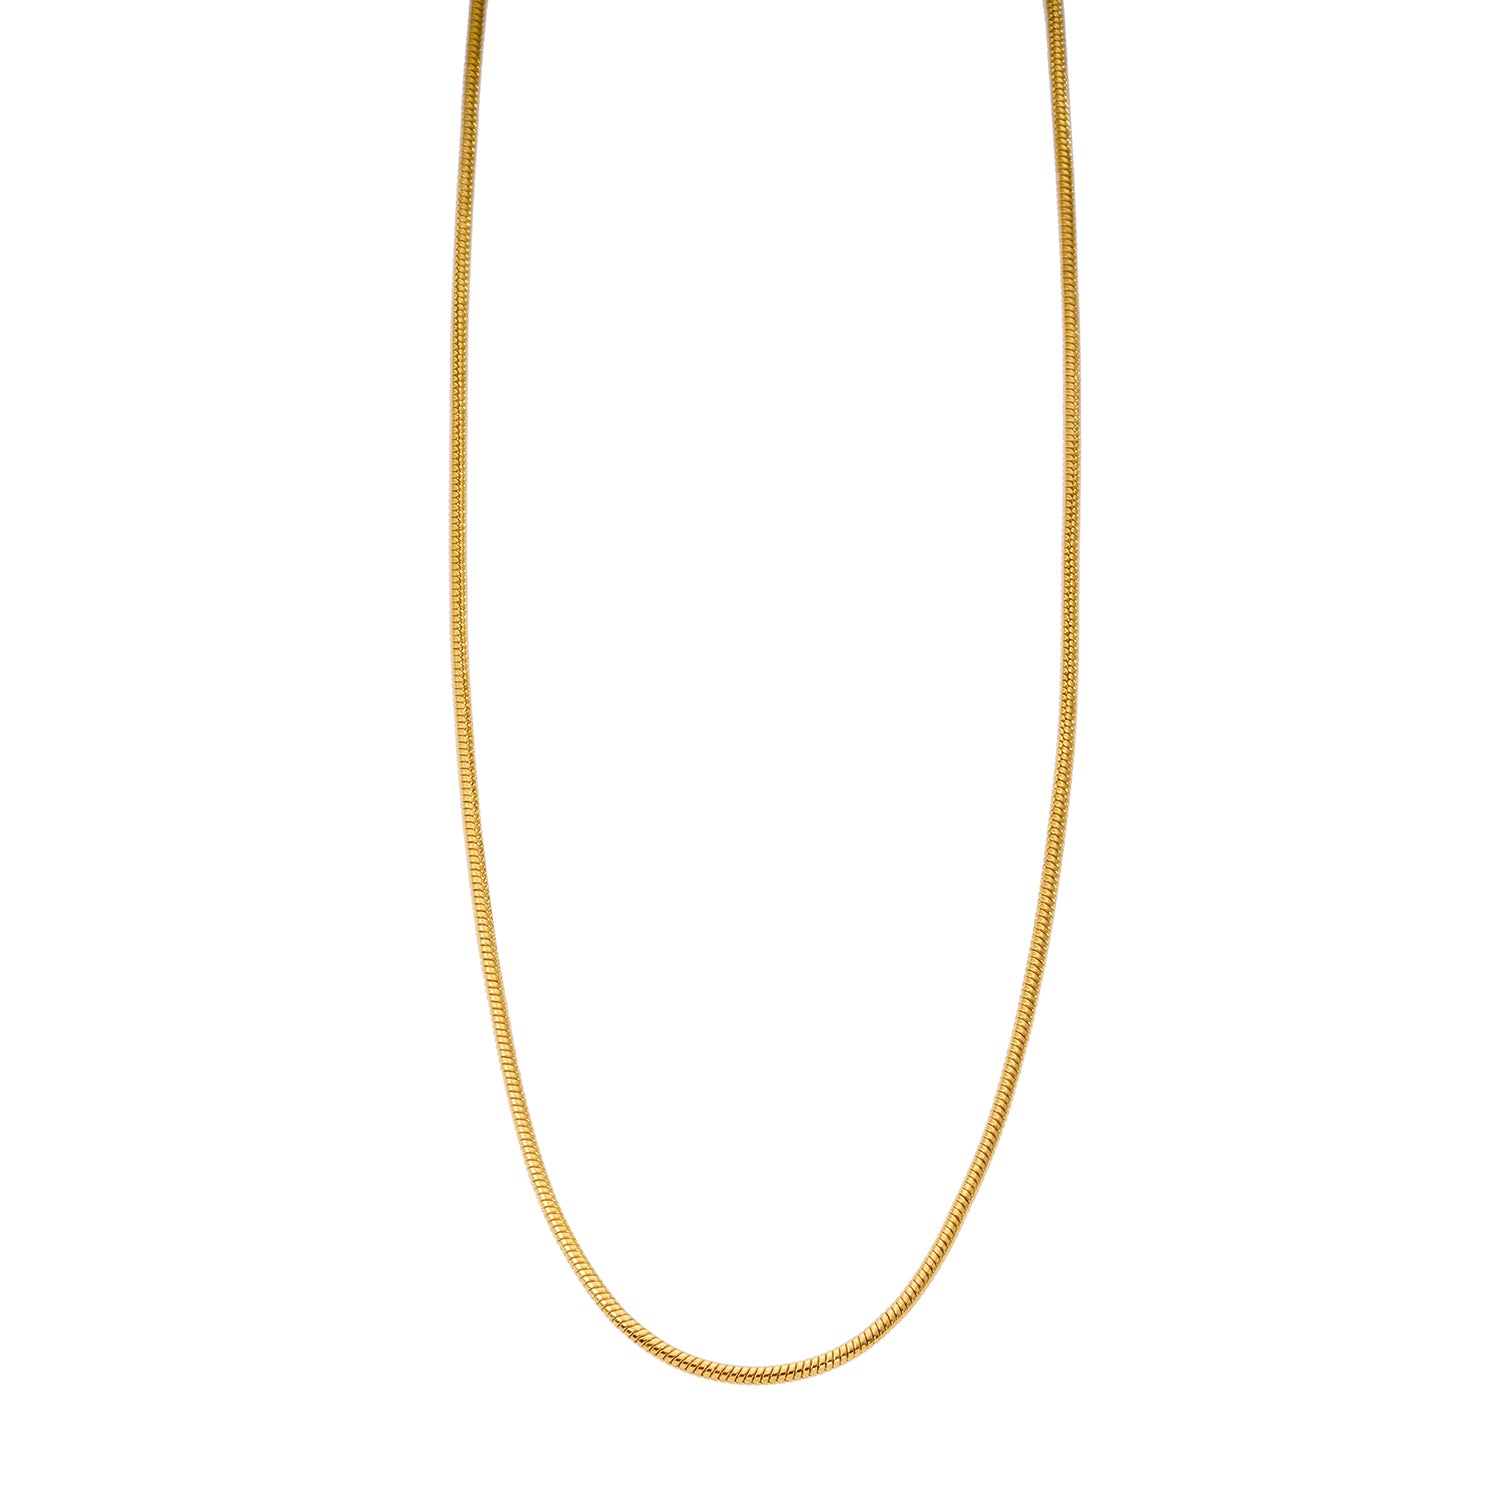 Style CHASTITY 4936: Dainty Snake Skin Textured Gold Chain Necklace.